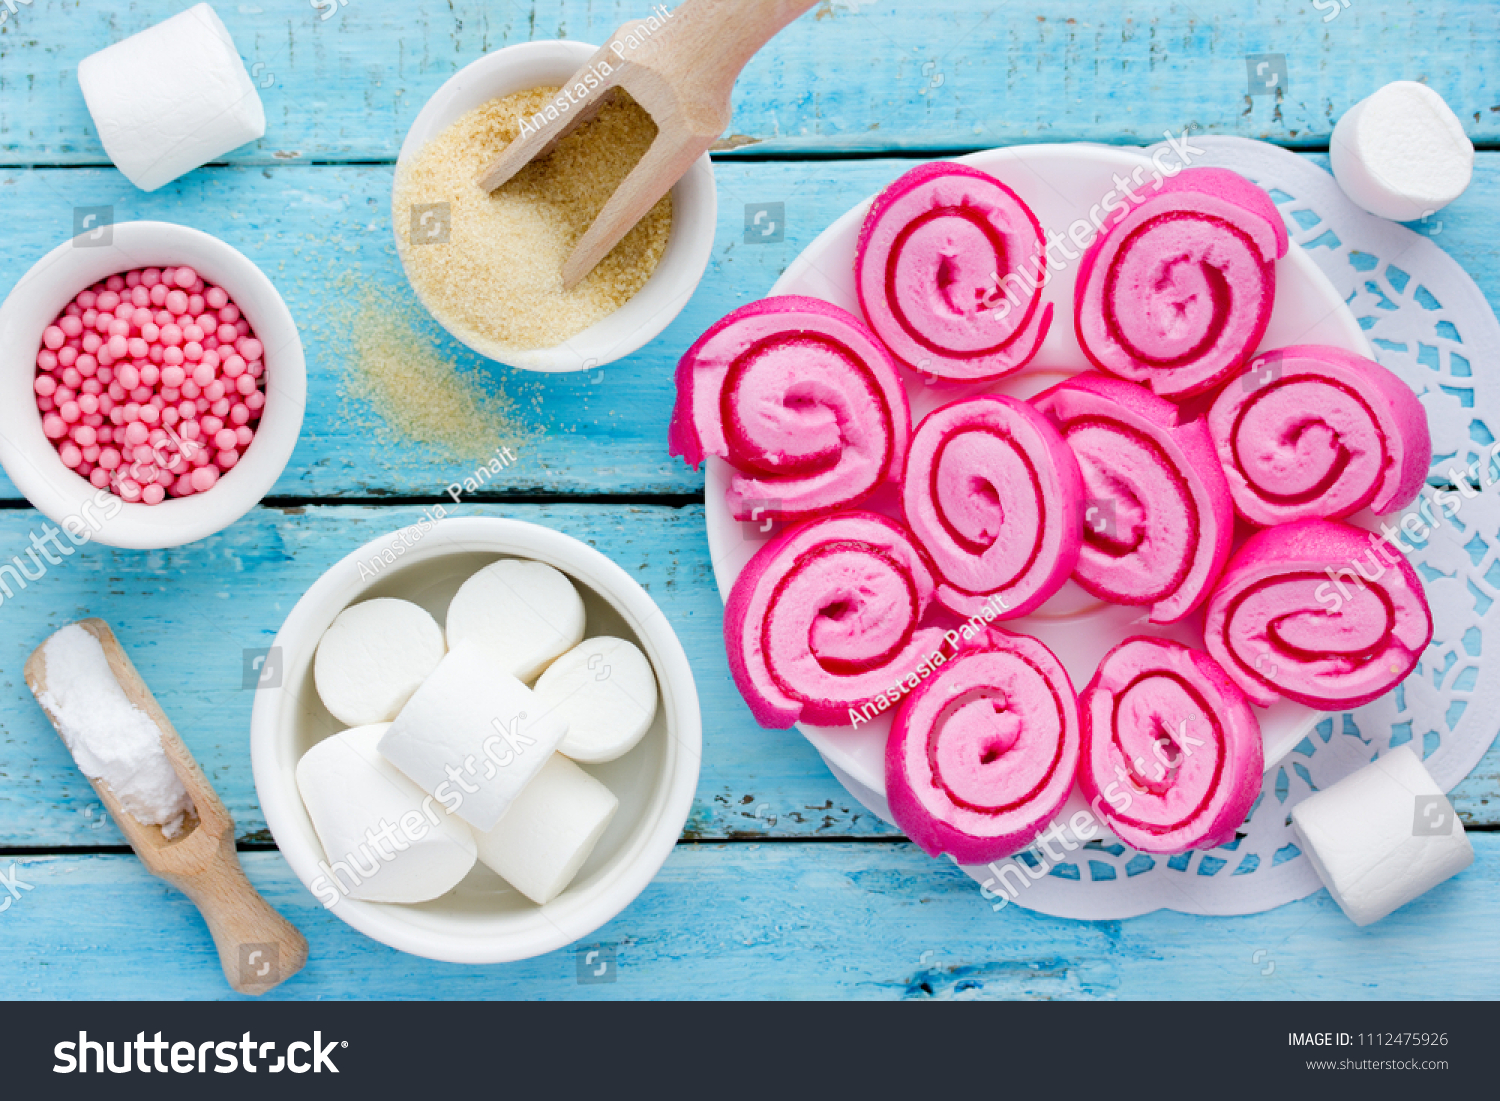 Find Marshmallow Jelly Rolls Homemade Jelly Roll stock images in HD and mil...